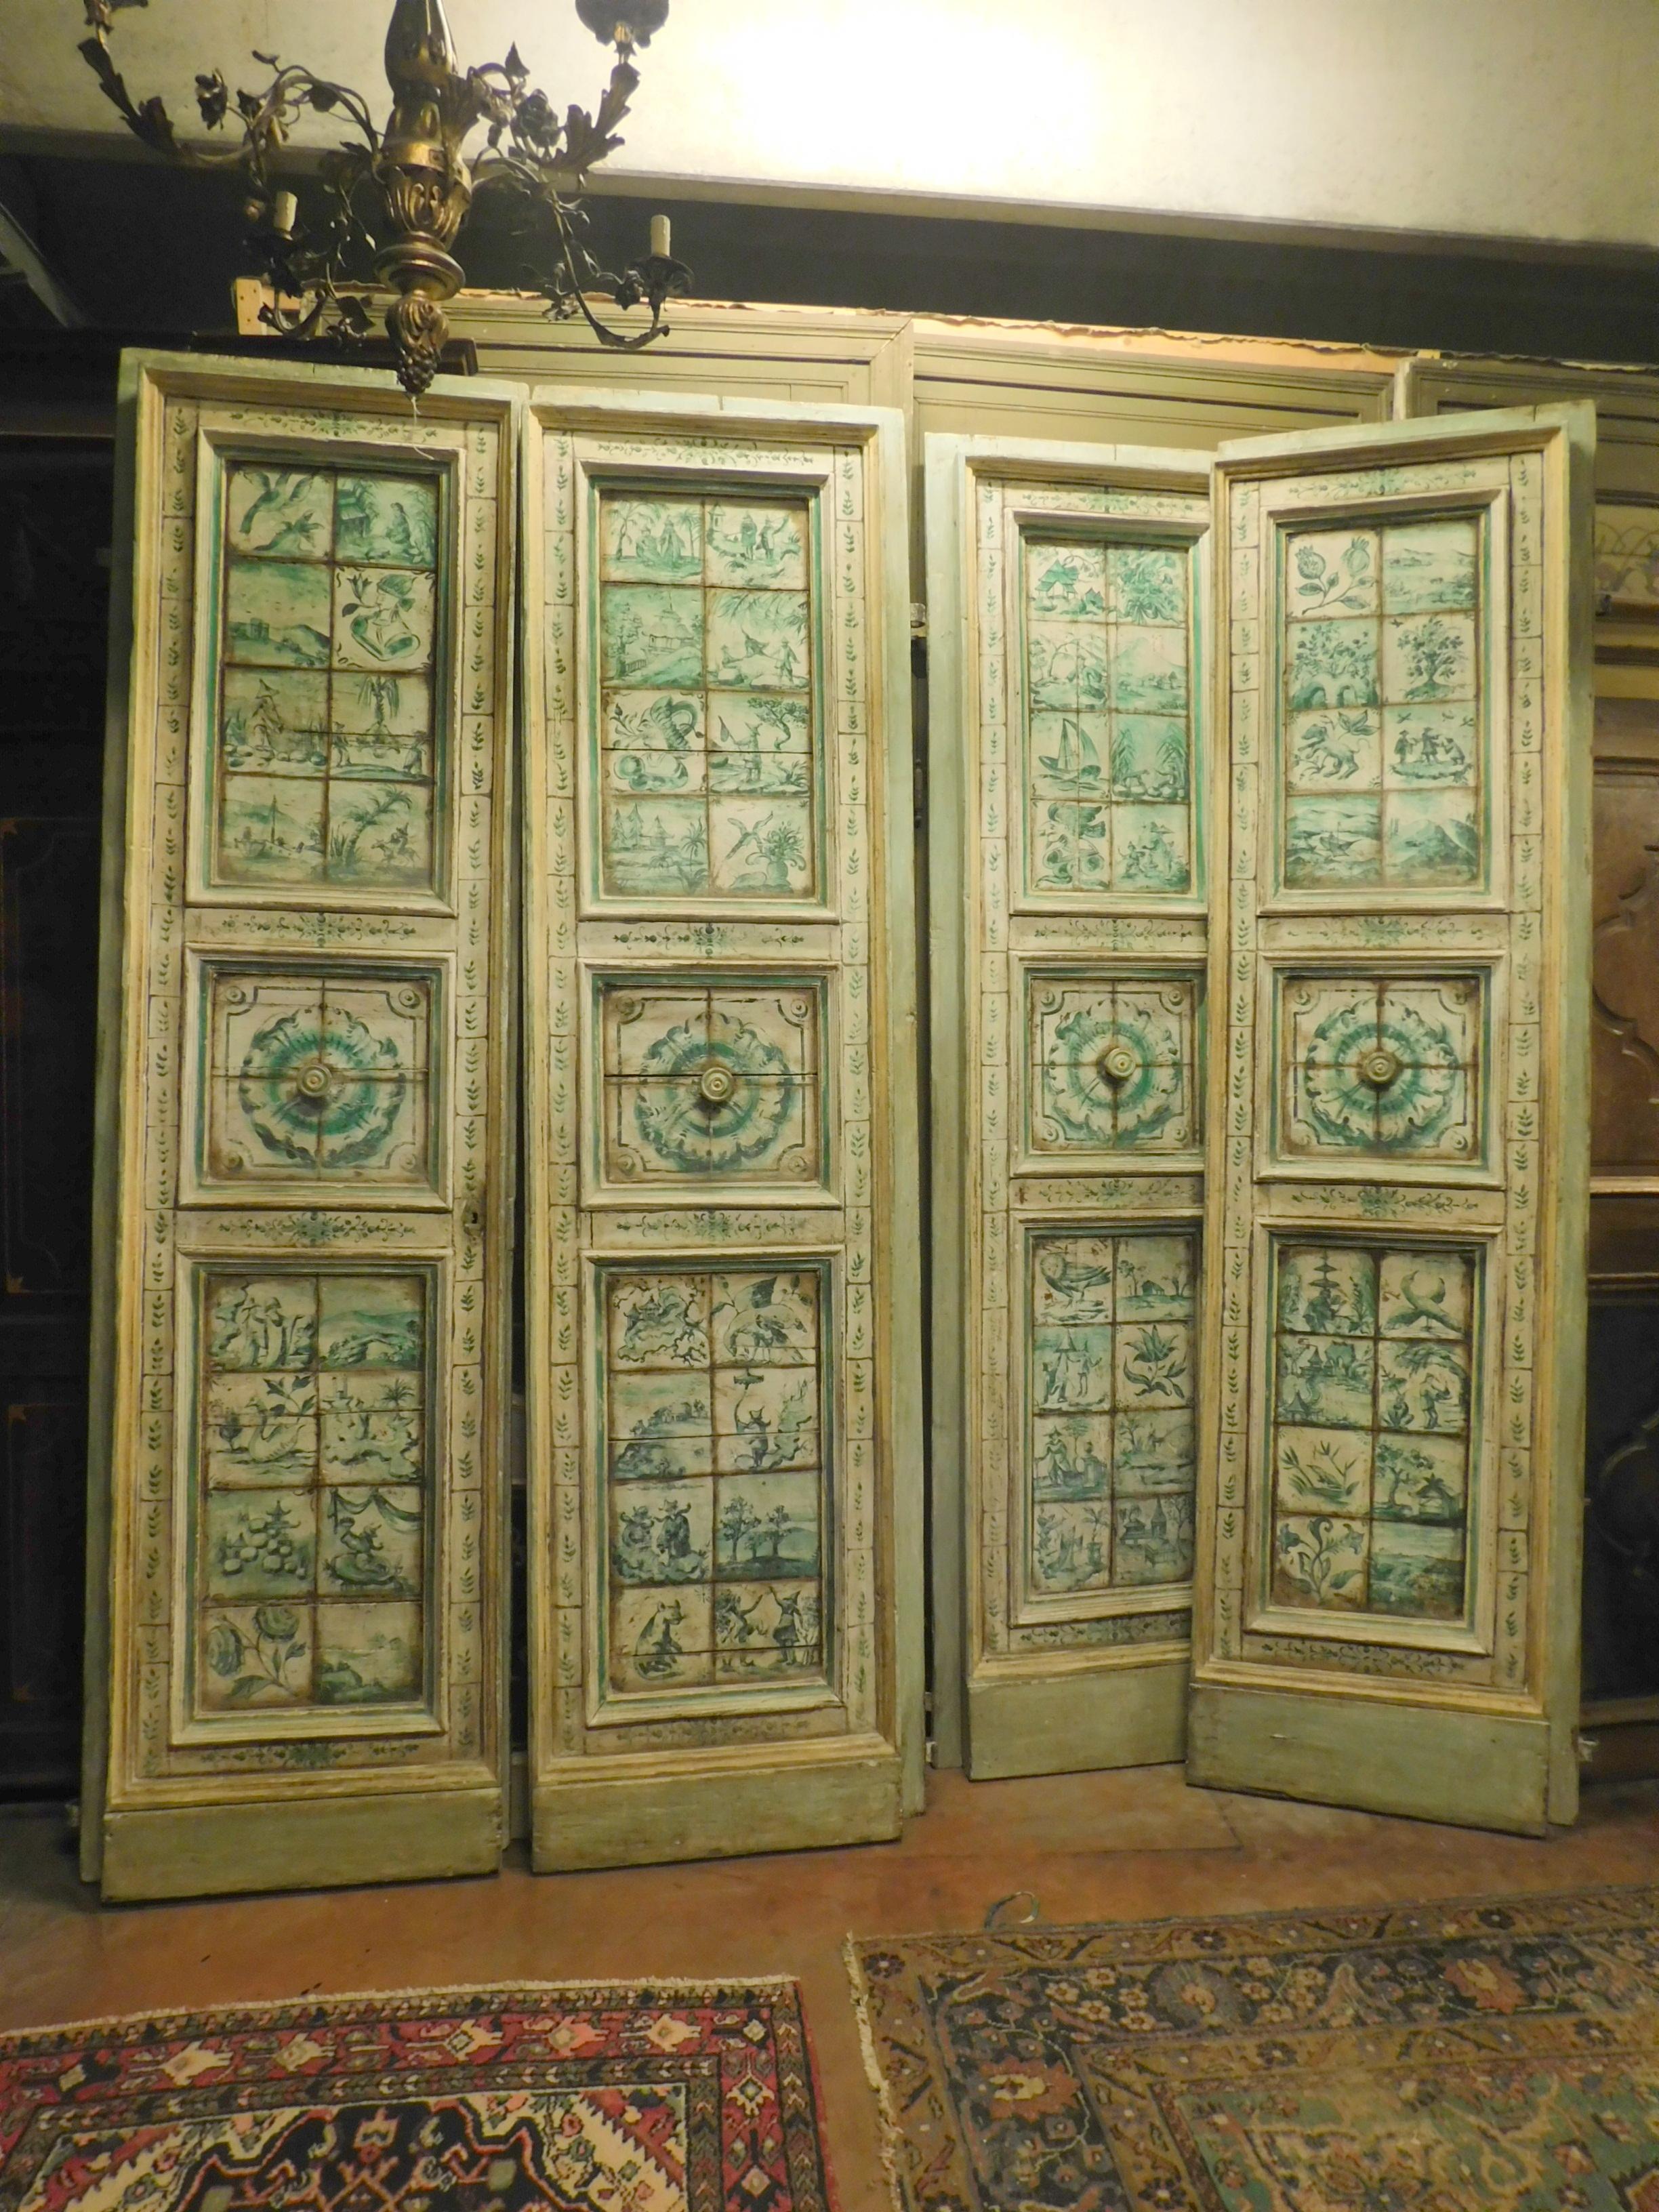 5 double-wing doors, pairs of ancient doors with hand painted Majolica tiles, green color on a cream white background, from a prestigious villa in Tuscany, where they produced the majolica.
Made by an Italian 18th century craftsman, doors of great